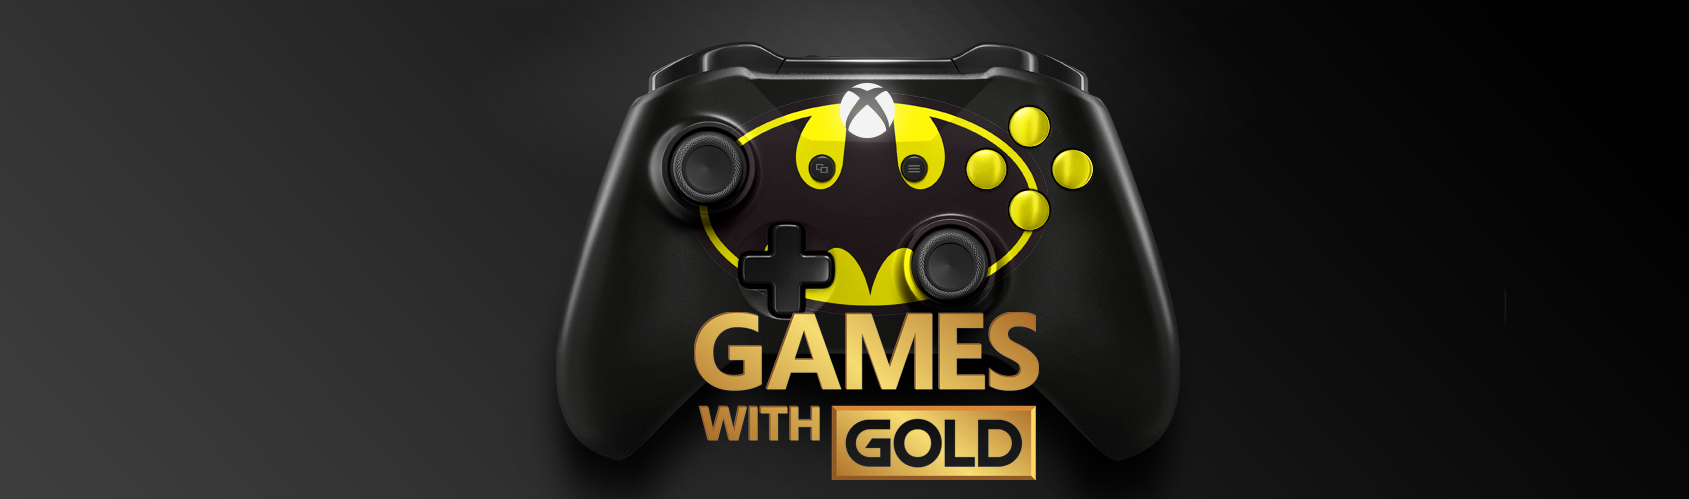 Xbox Live Gold Games for May Revealed-Custom Controllers UK